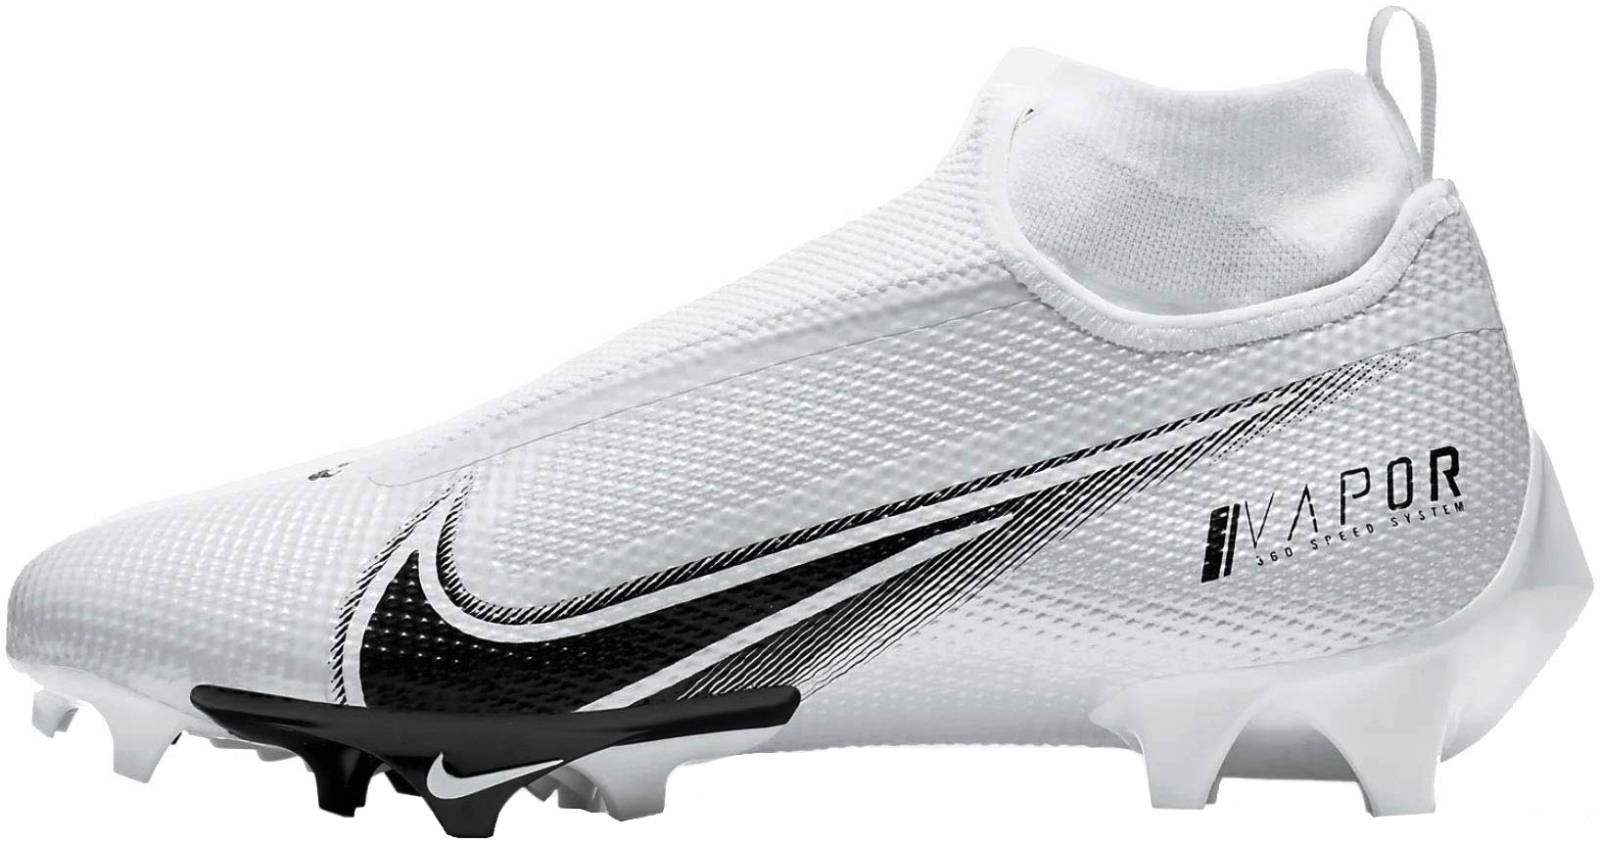 white low top cleats